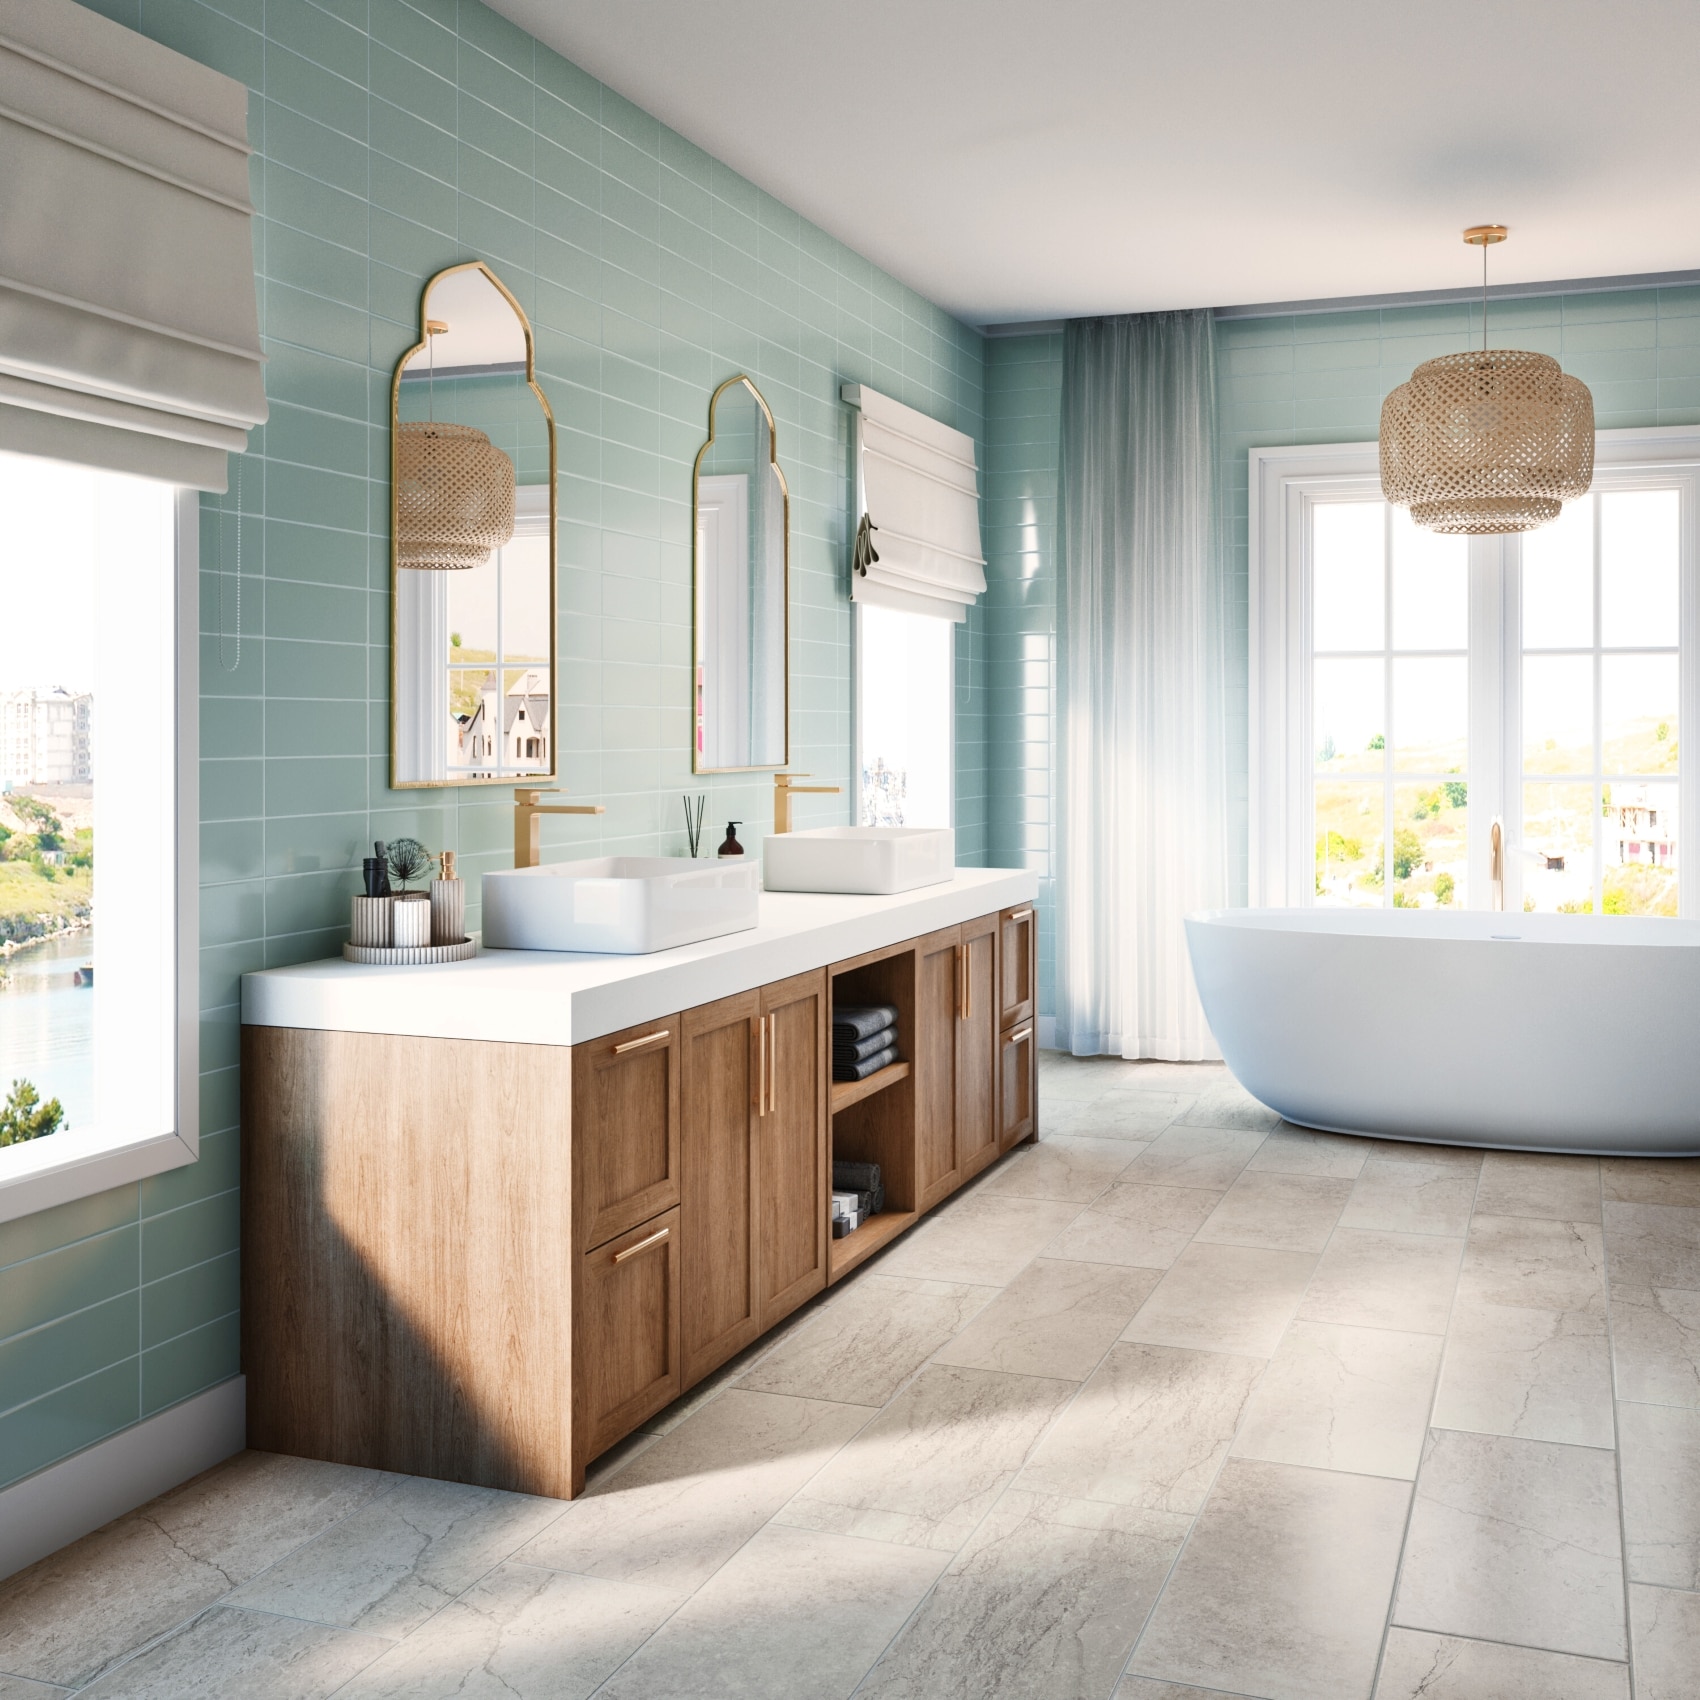 Large bathroom with a free standing tub and light blue tiled walls.